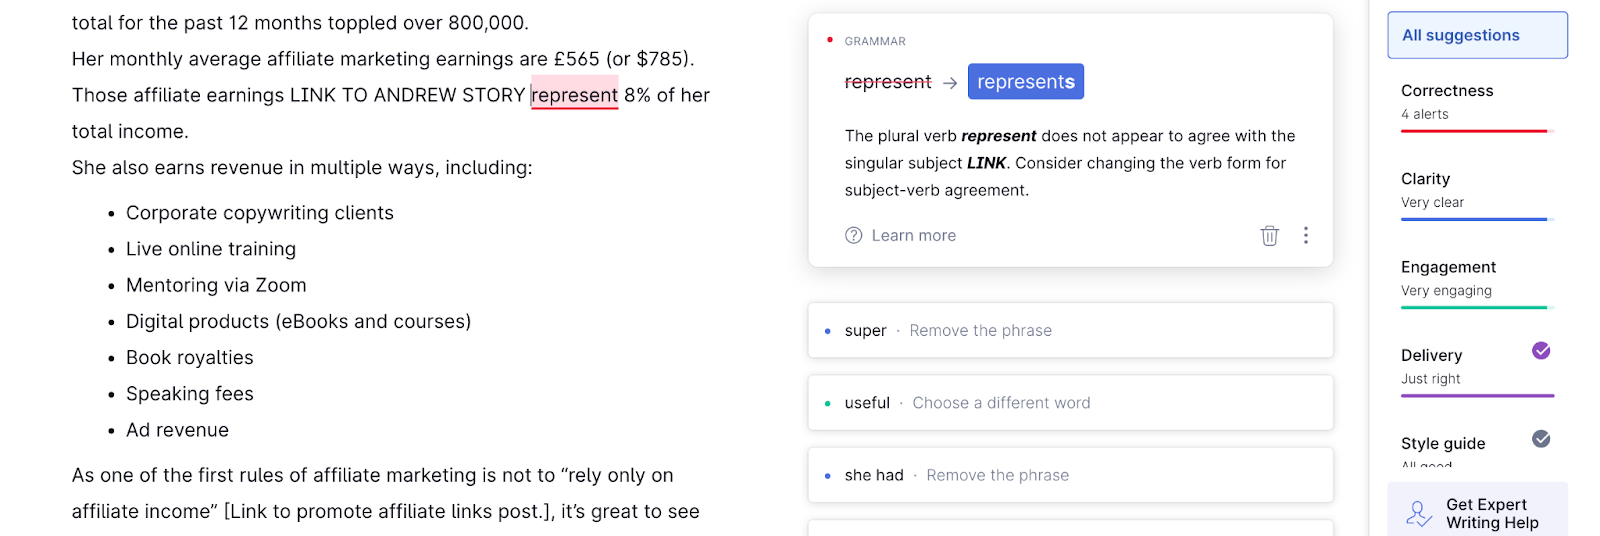 grammarly interface showing grammar errors and clarity engagement and delivery scores in right column of google doc